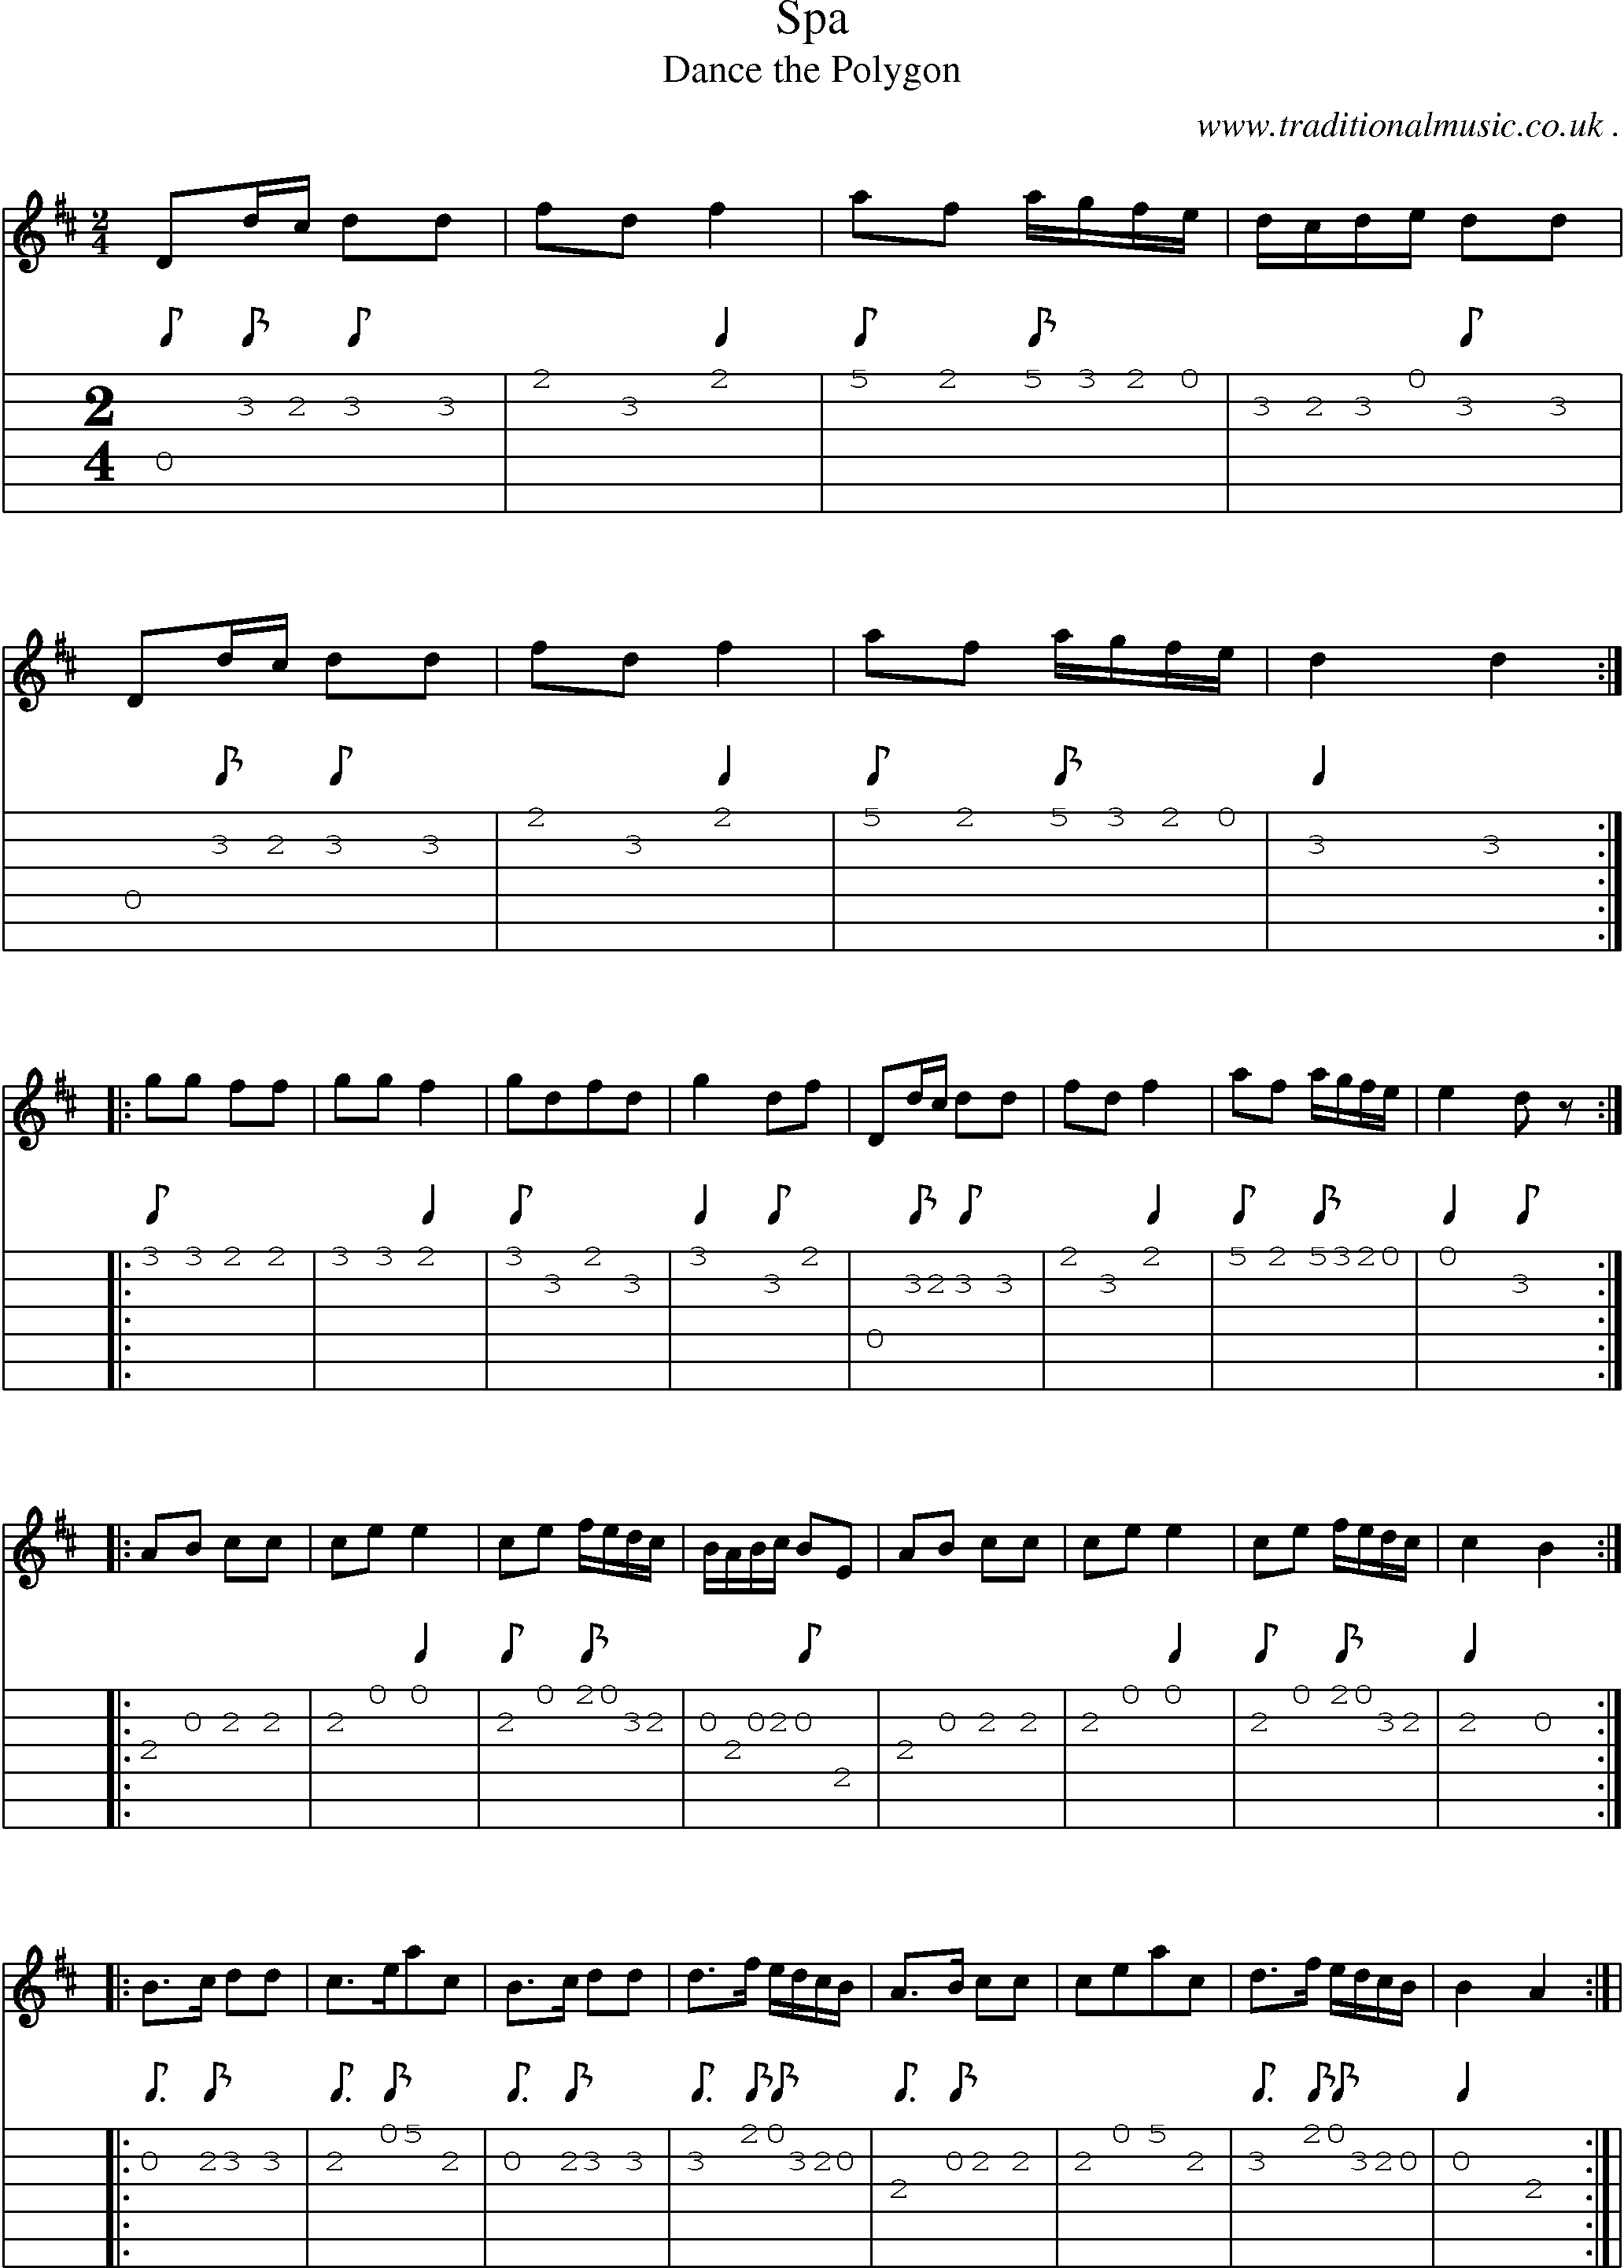 Sheet-Music and Guitar Tabs for Spa